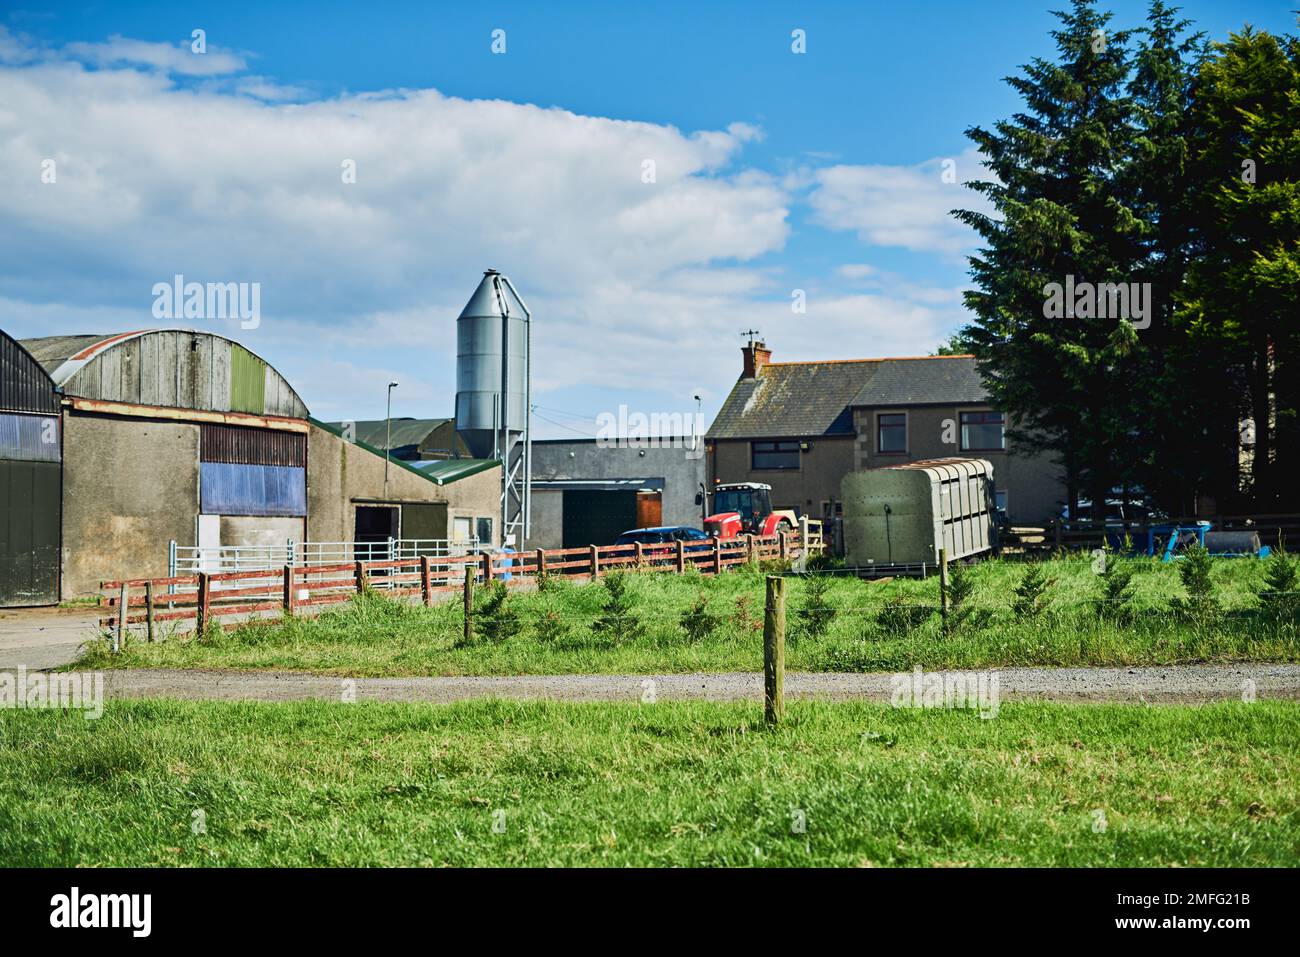 The perfect spot for a dairy farm. a dairy factory on wide open farmland in the countryside. Stock Photo